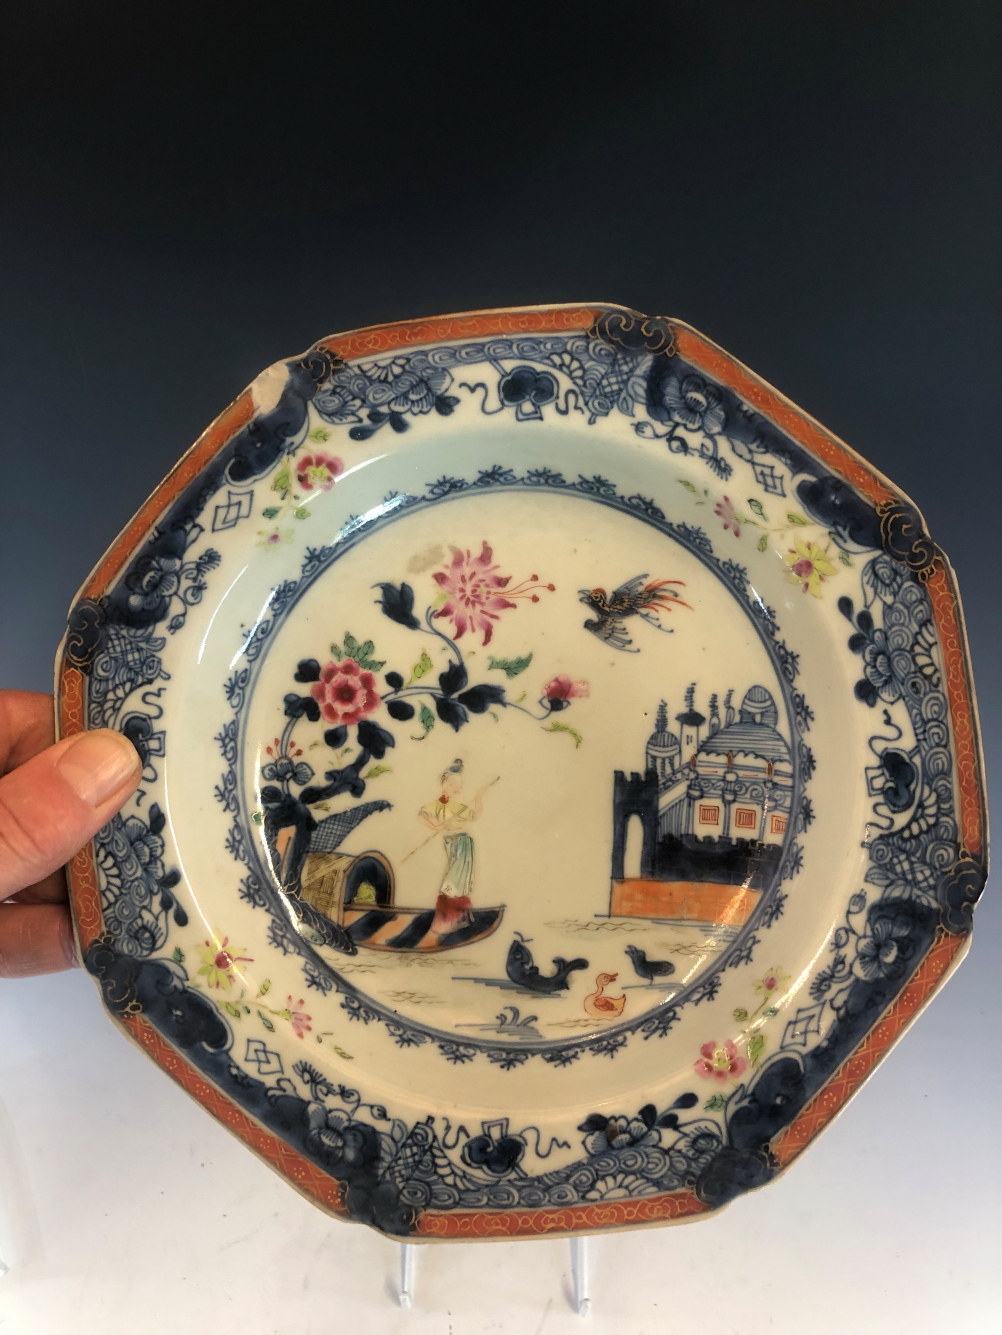 SIX LATE 18th C CHINESE SOUP PLATES PAINTED IN UNDERGLAZE BLUE AND FAMILLE ROSE WITH A LADY - Image 13 of 29